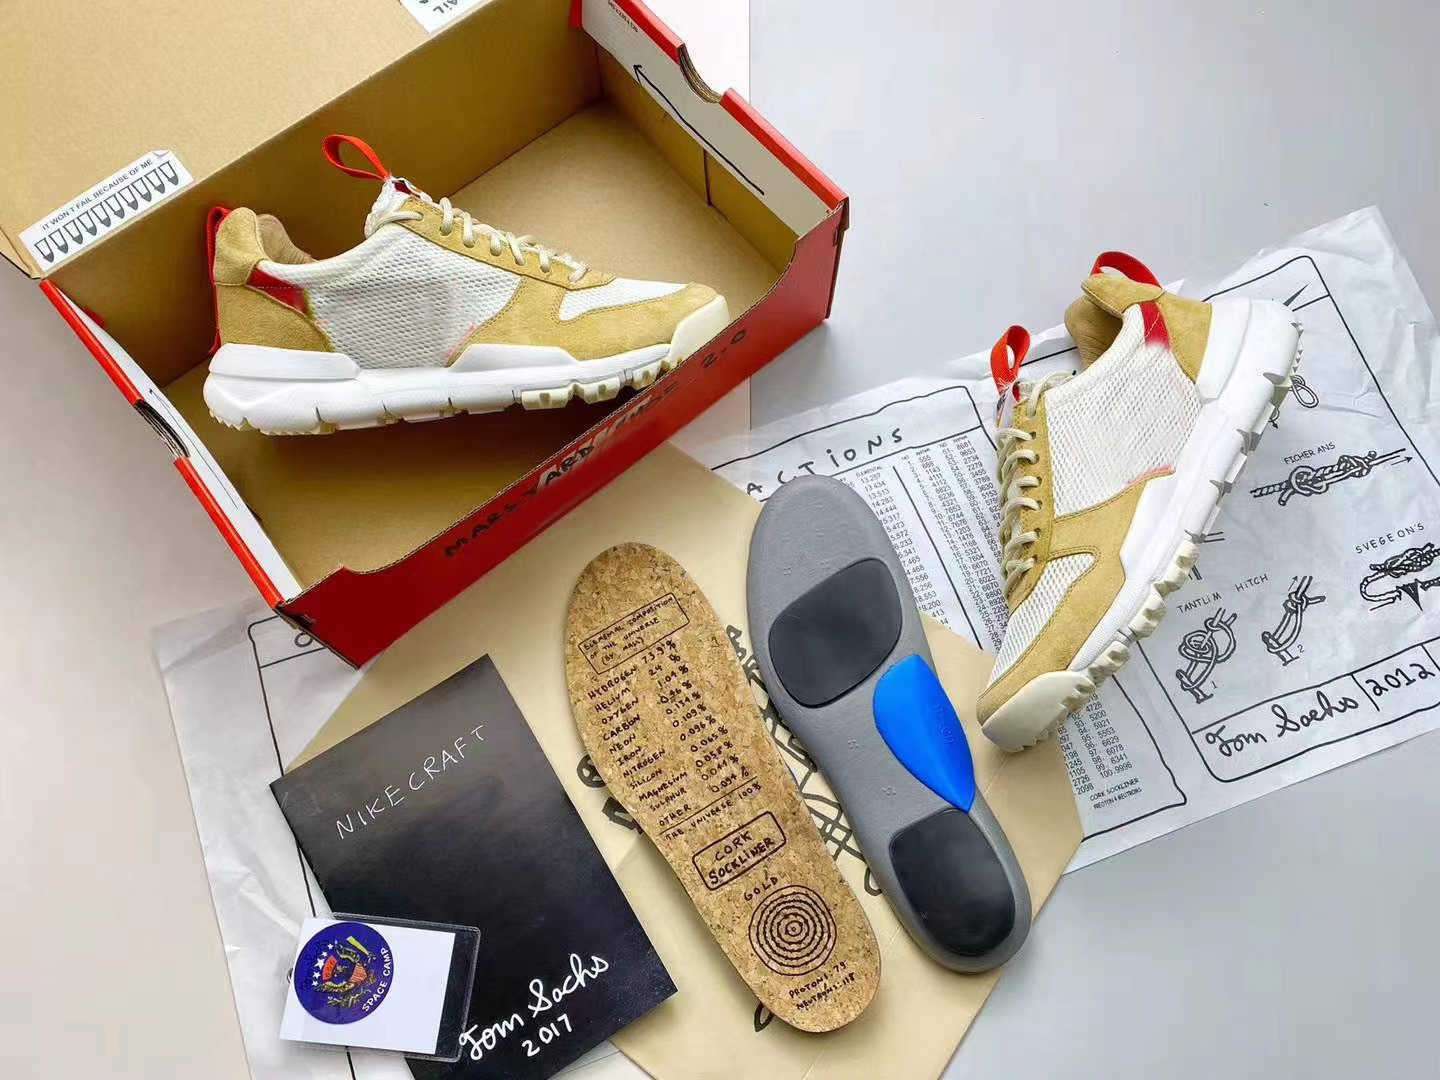 

2021 Authentic Tom Sachs x Craft Mars Yard 2.0 Ts Joint Limited Sneaker Natural Sport Red Maple Outdoor Shoes with Original Box, Tom sachs x mars yard 2.0